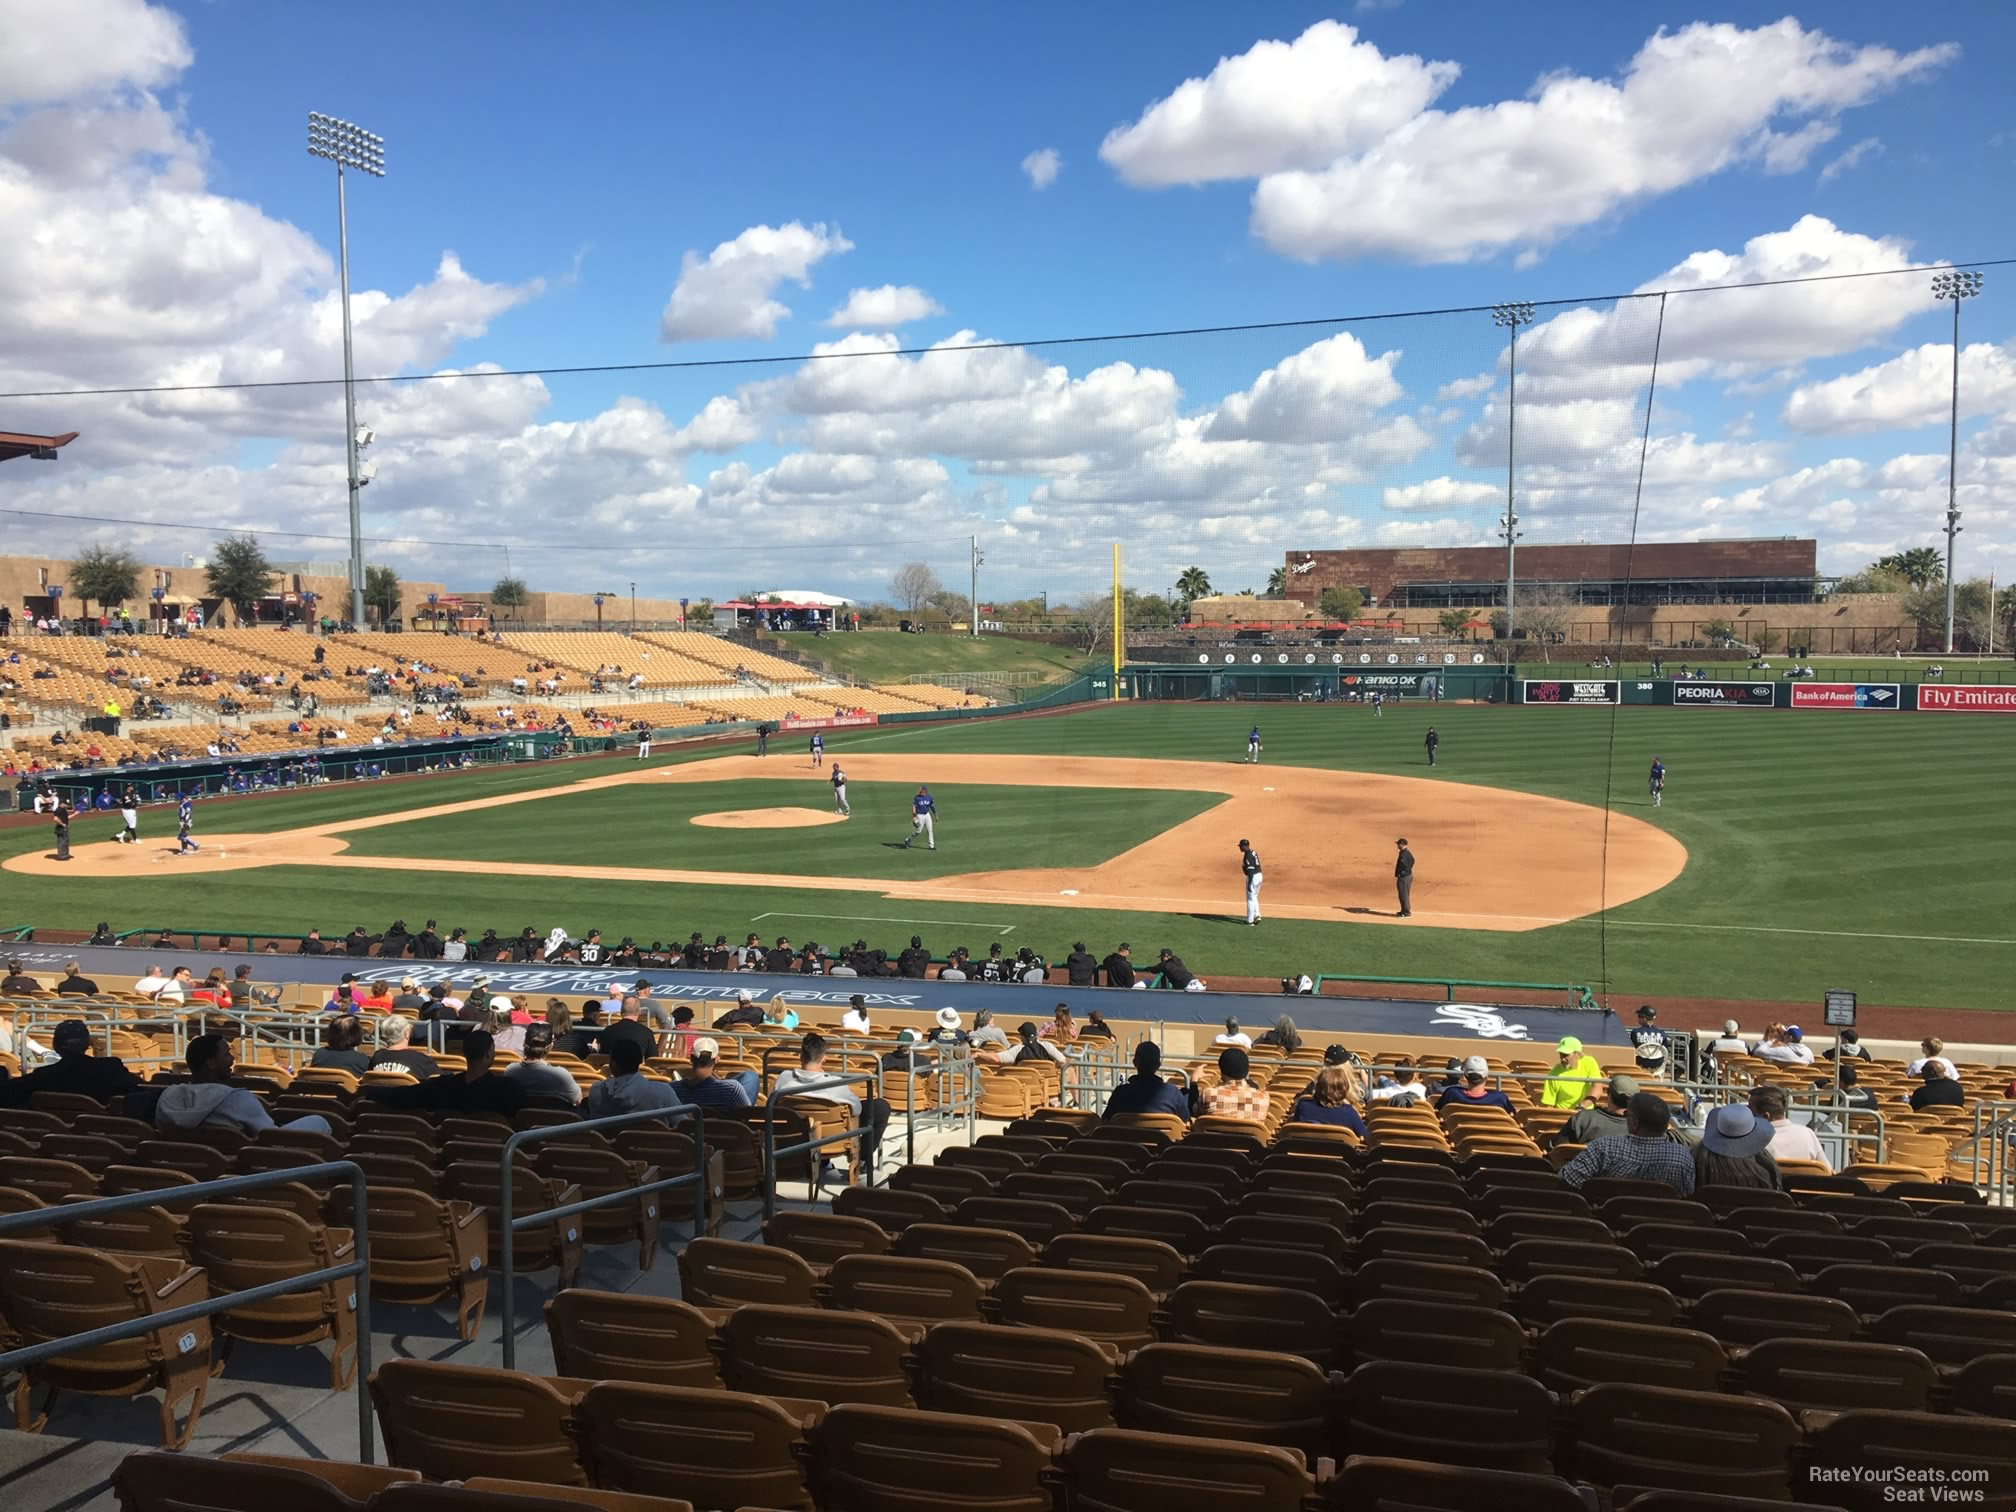 section 106, row 16 seat view  - camelback ranch